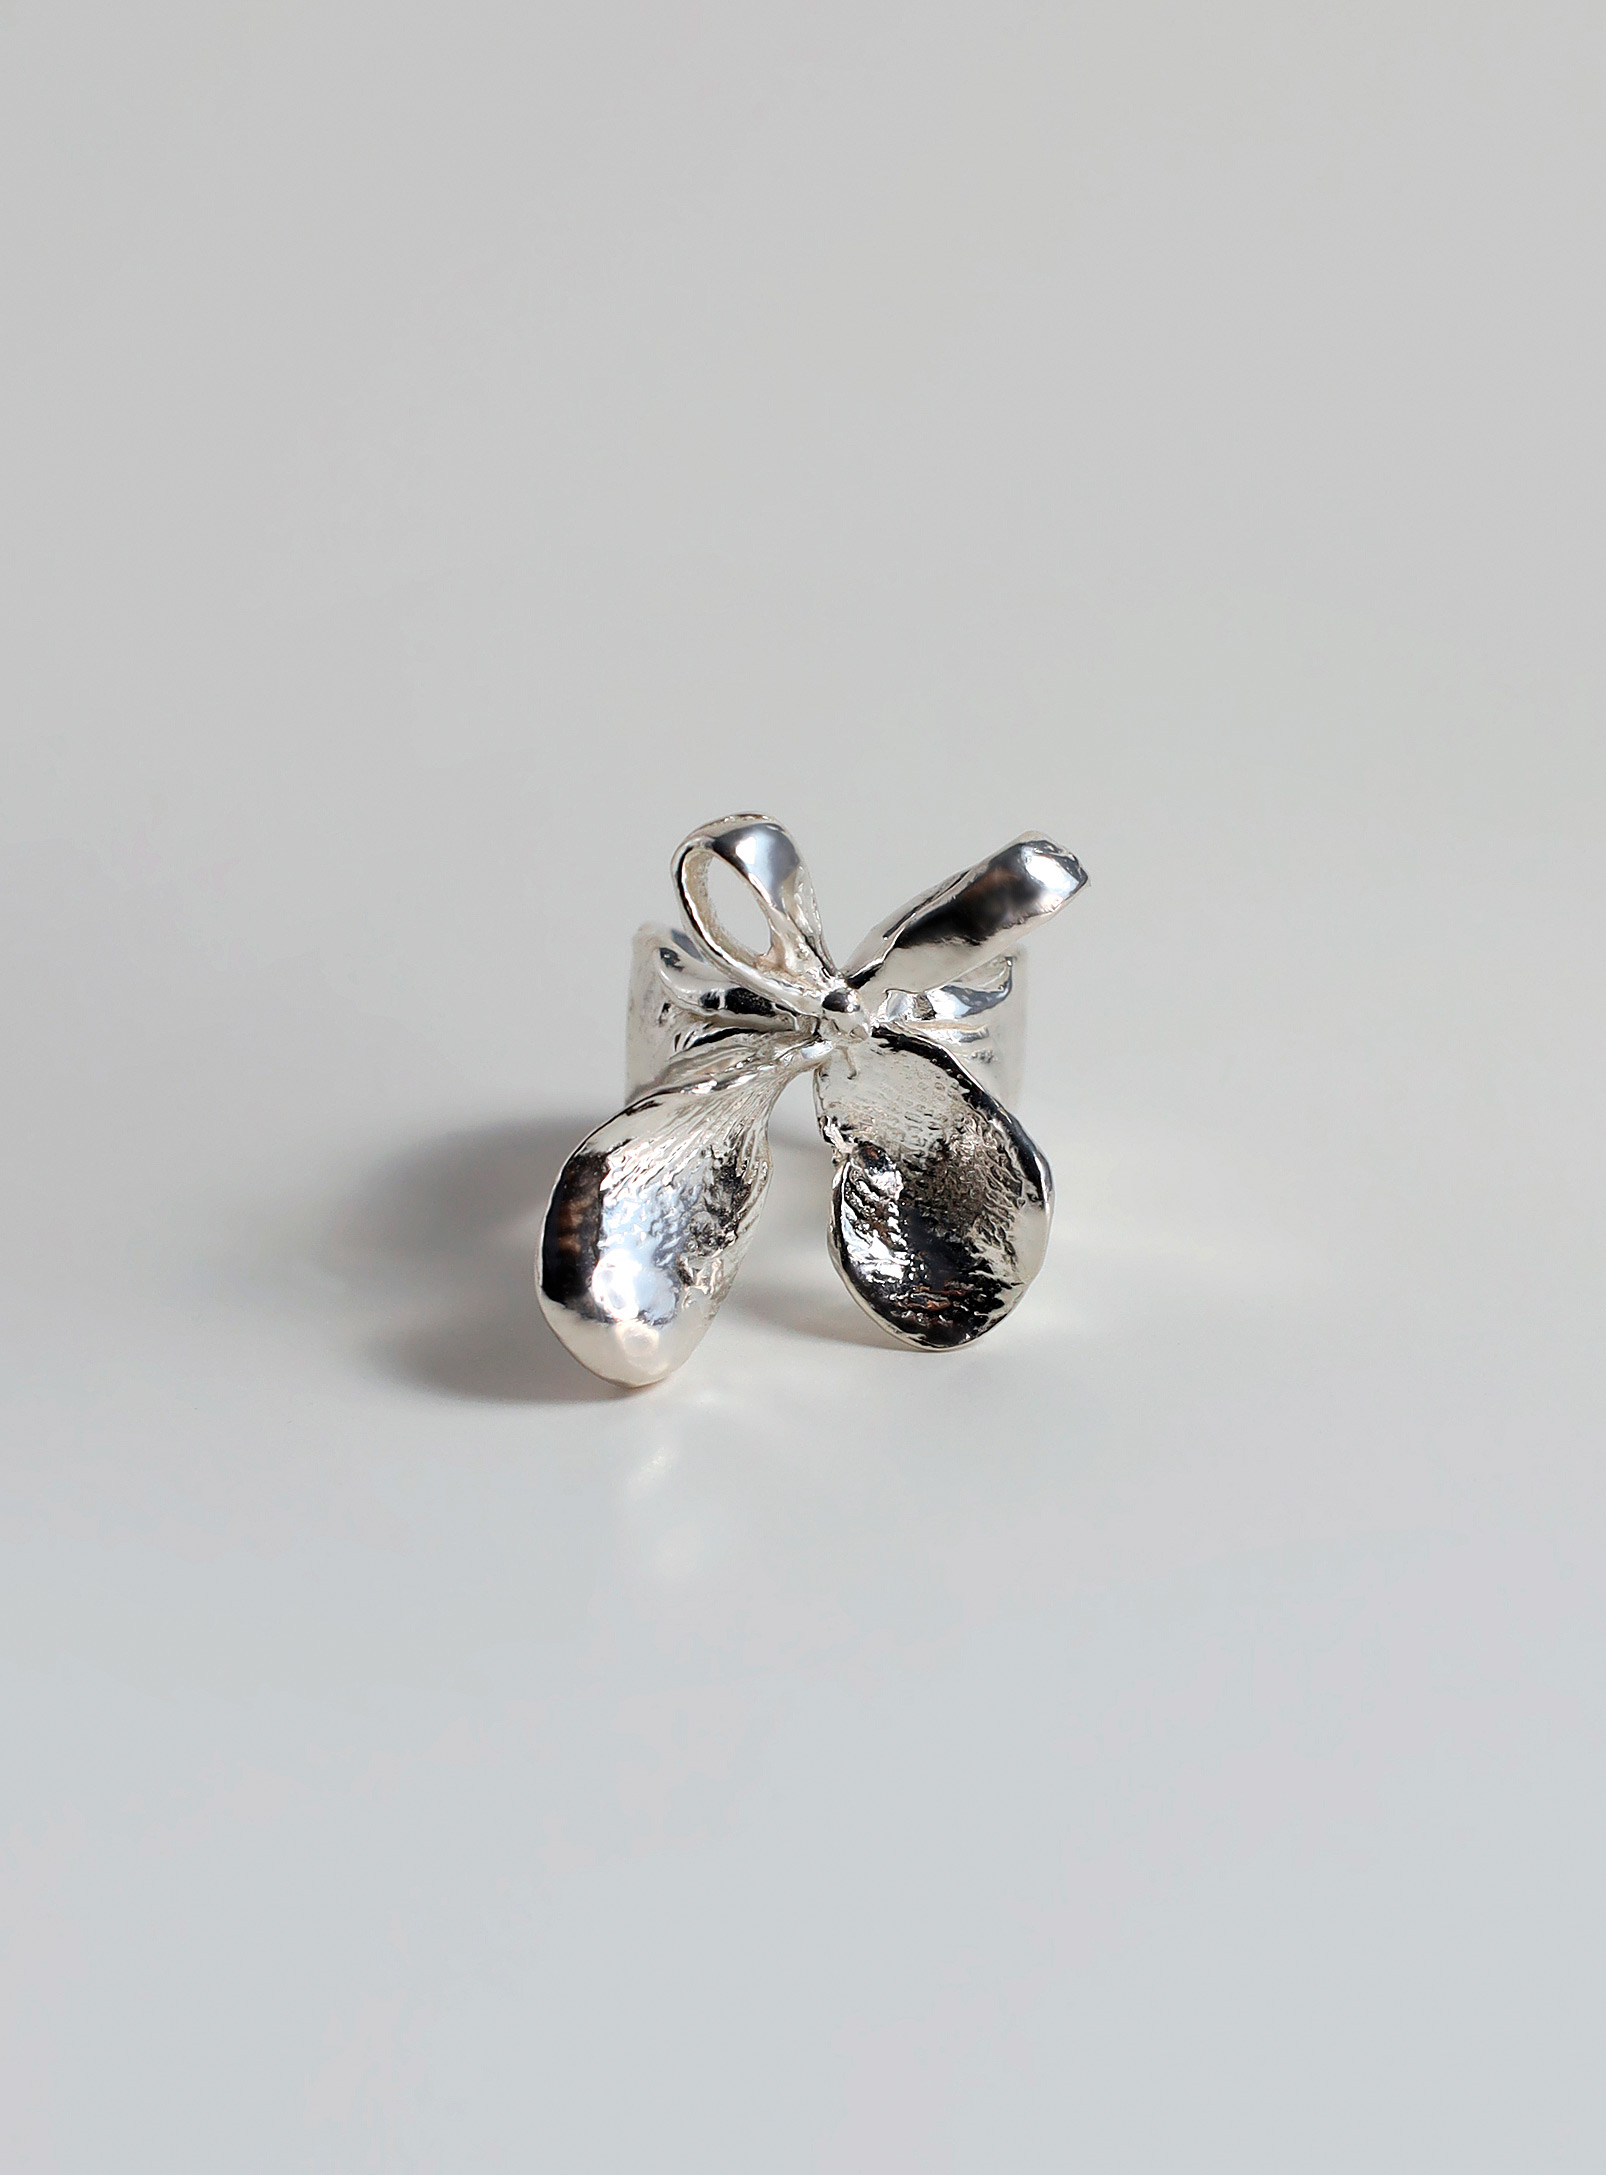 ORA-C - Finger Bow sterling silver cuff ring